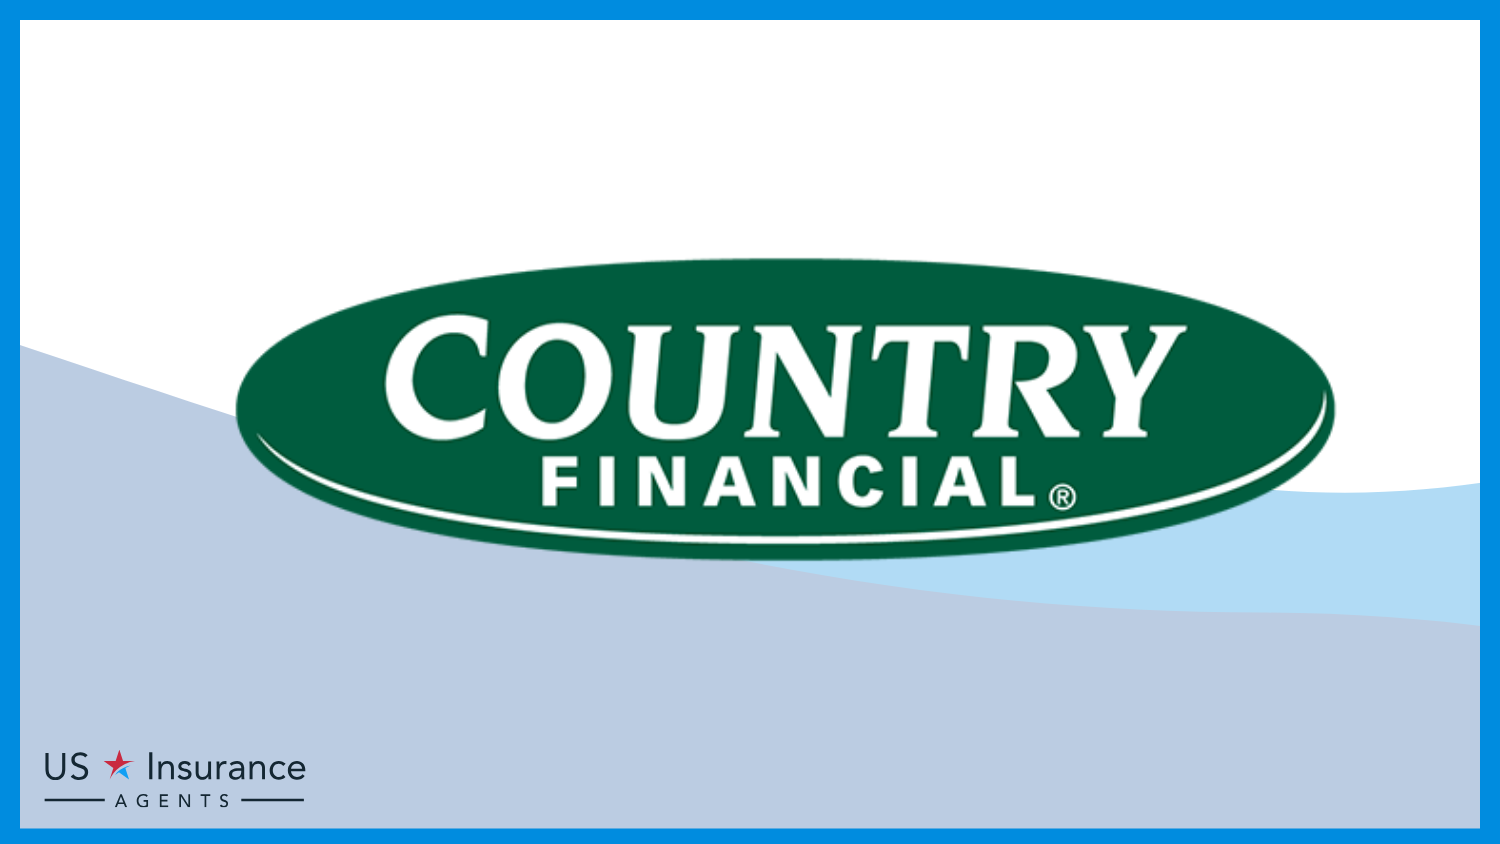 Best Whole Life Insurance : Country Financial 